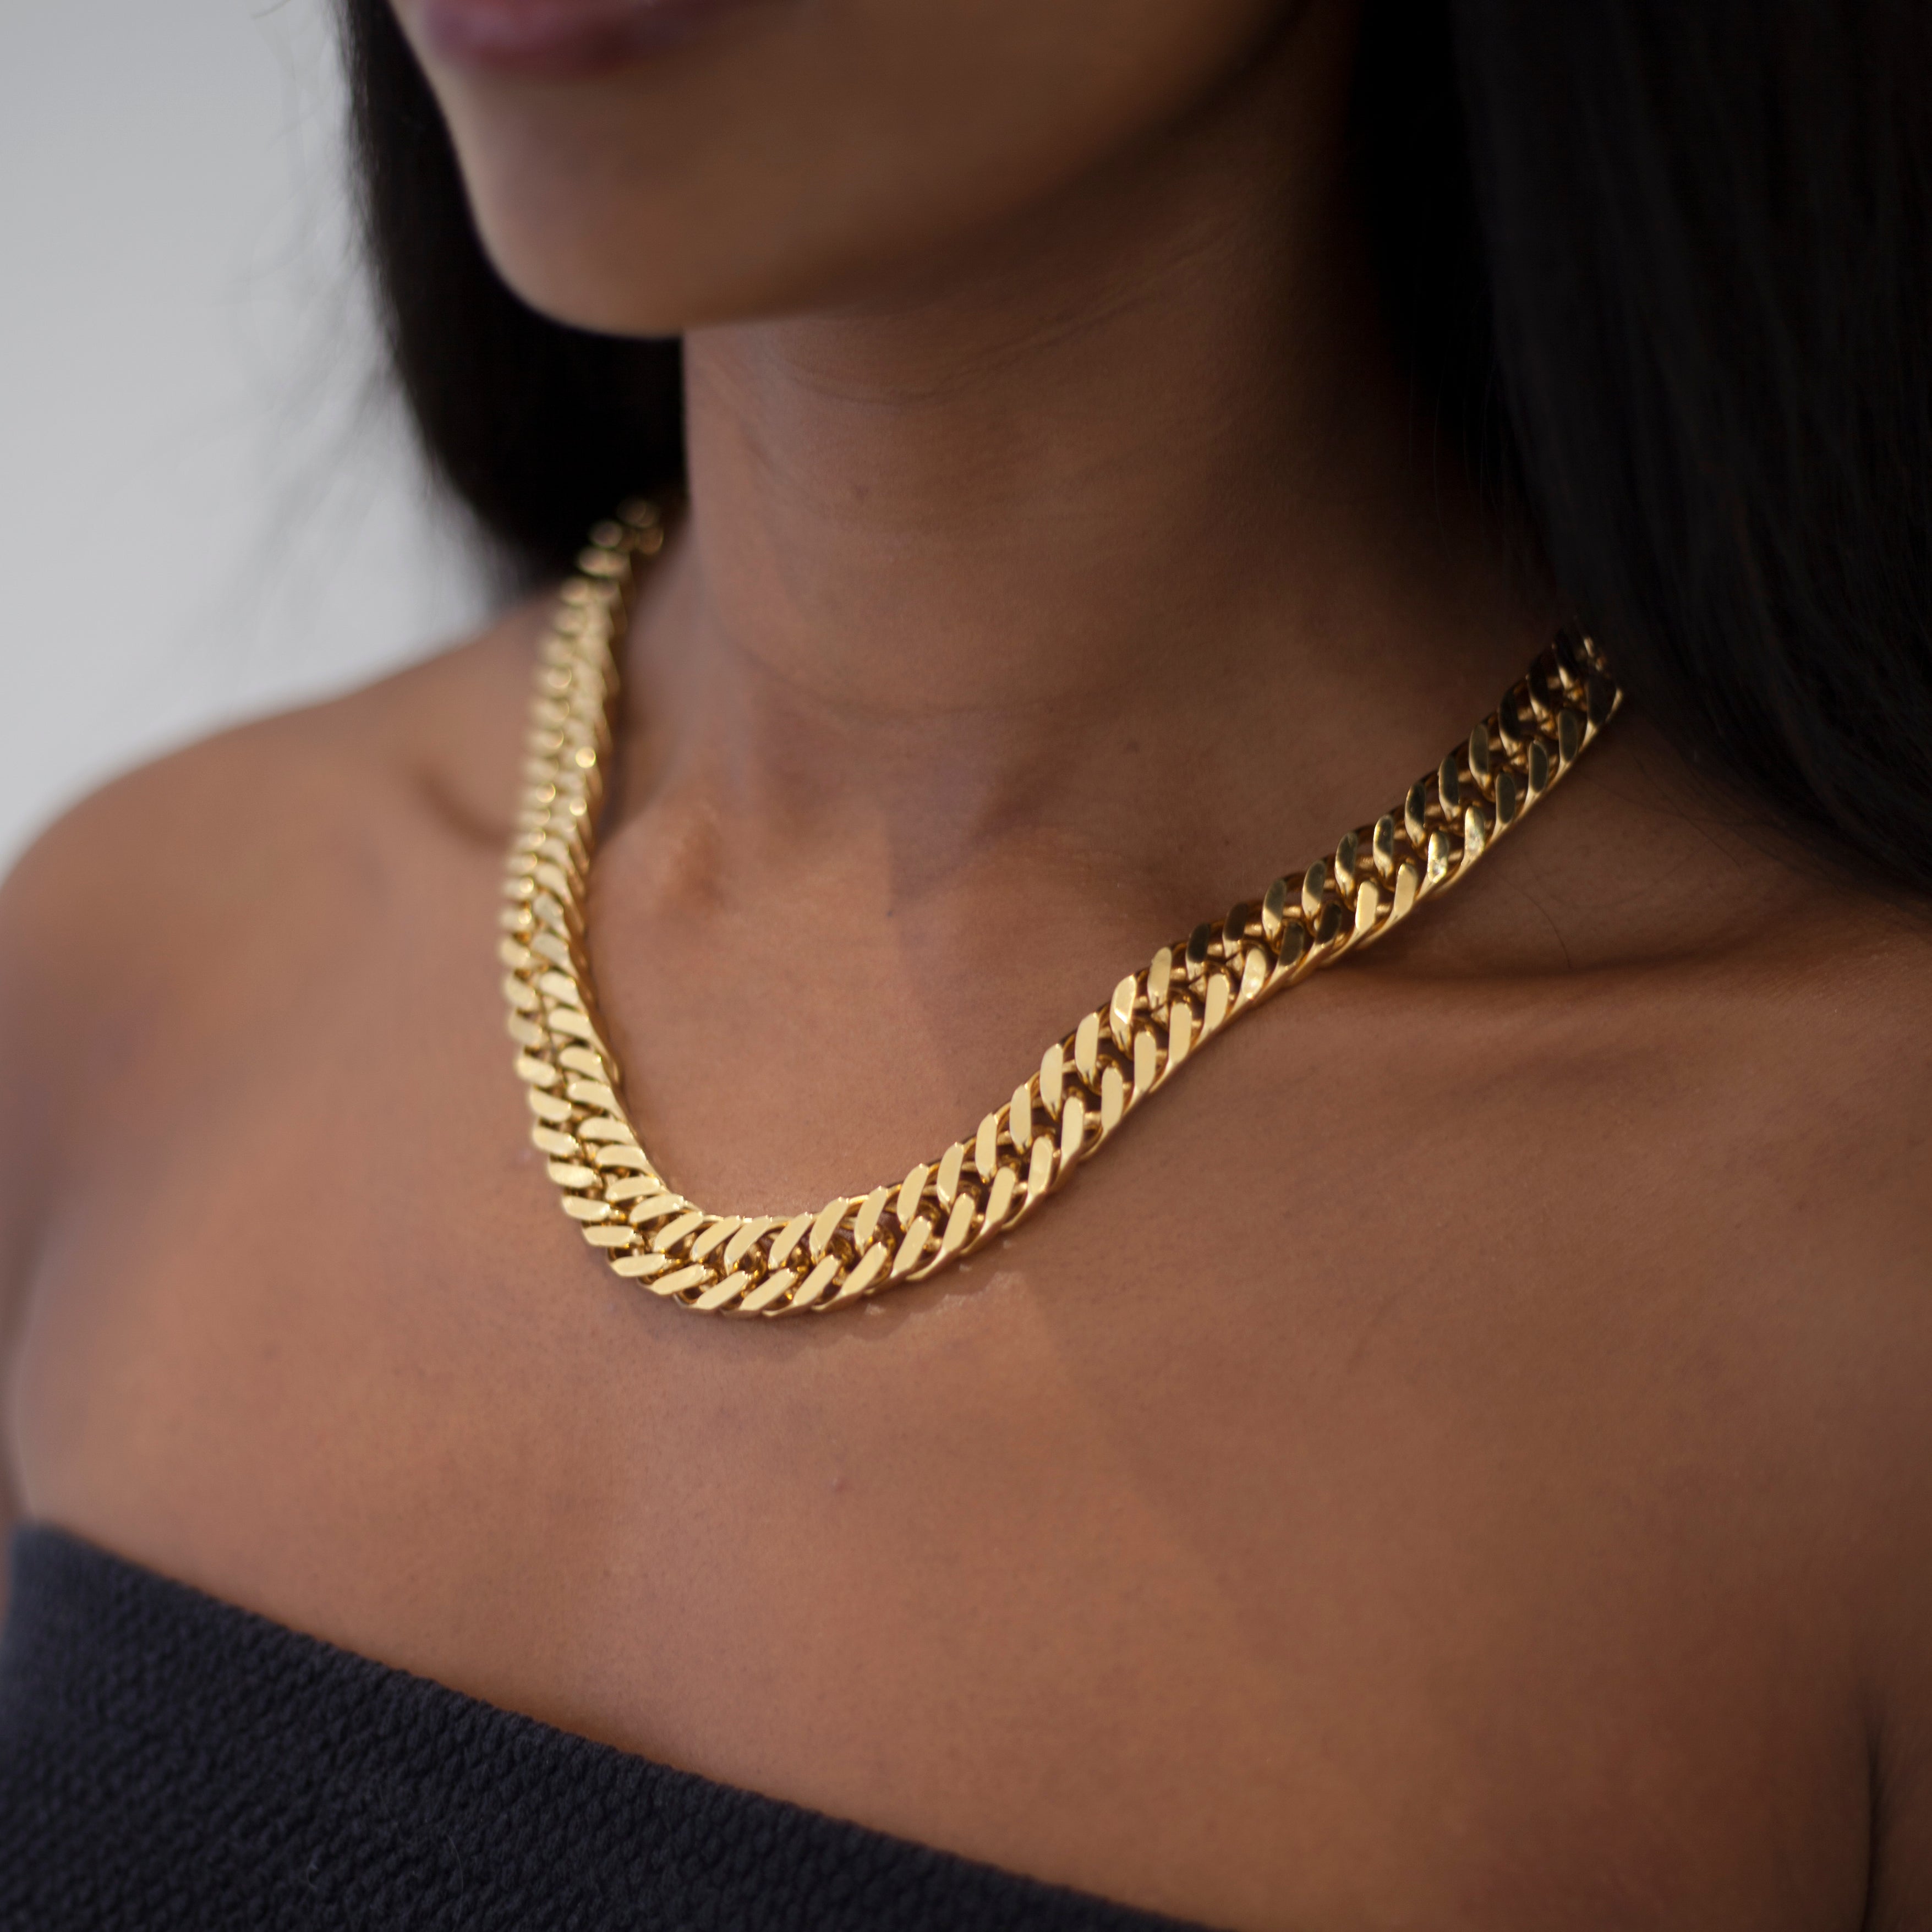 14k gold-plated statement necklace with thick chain on model